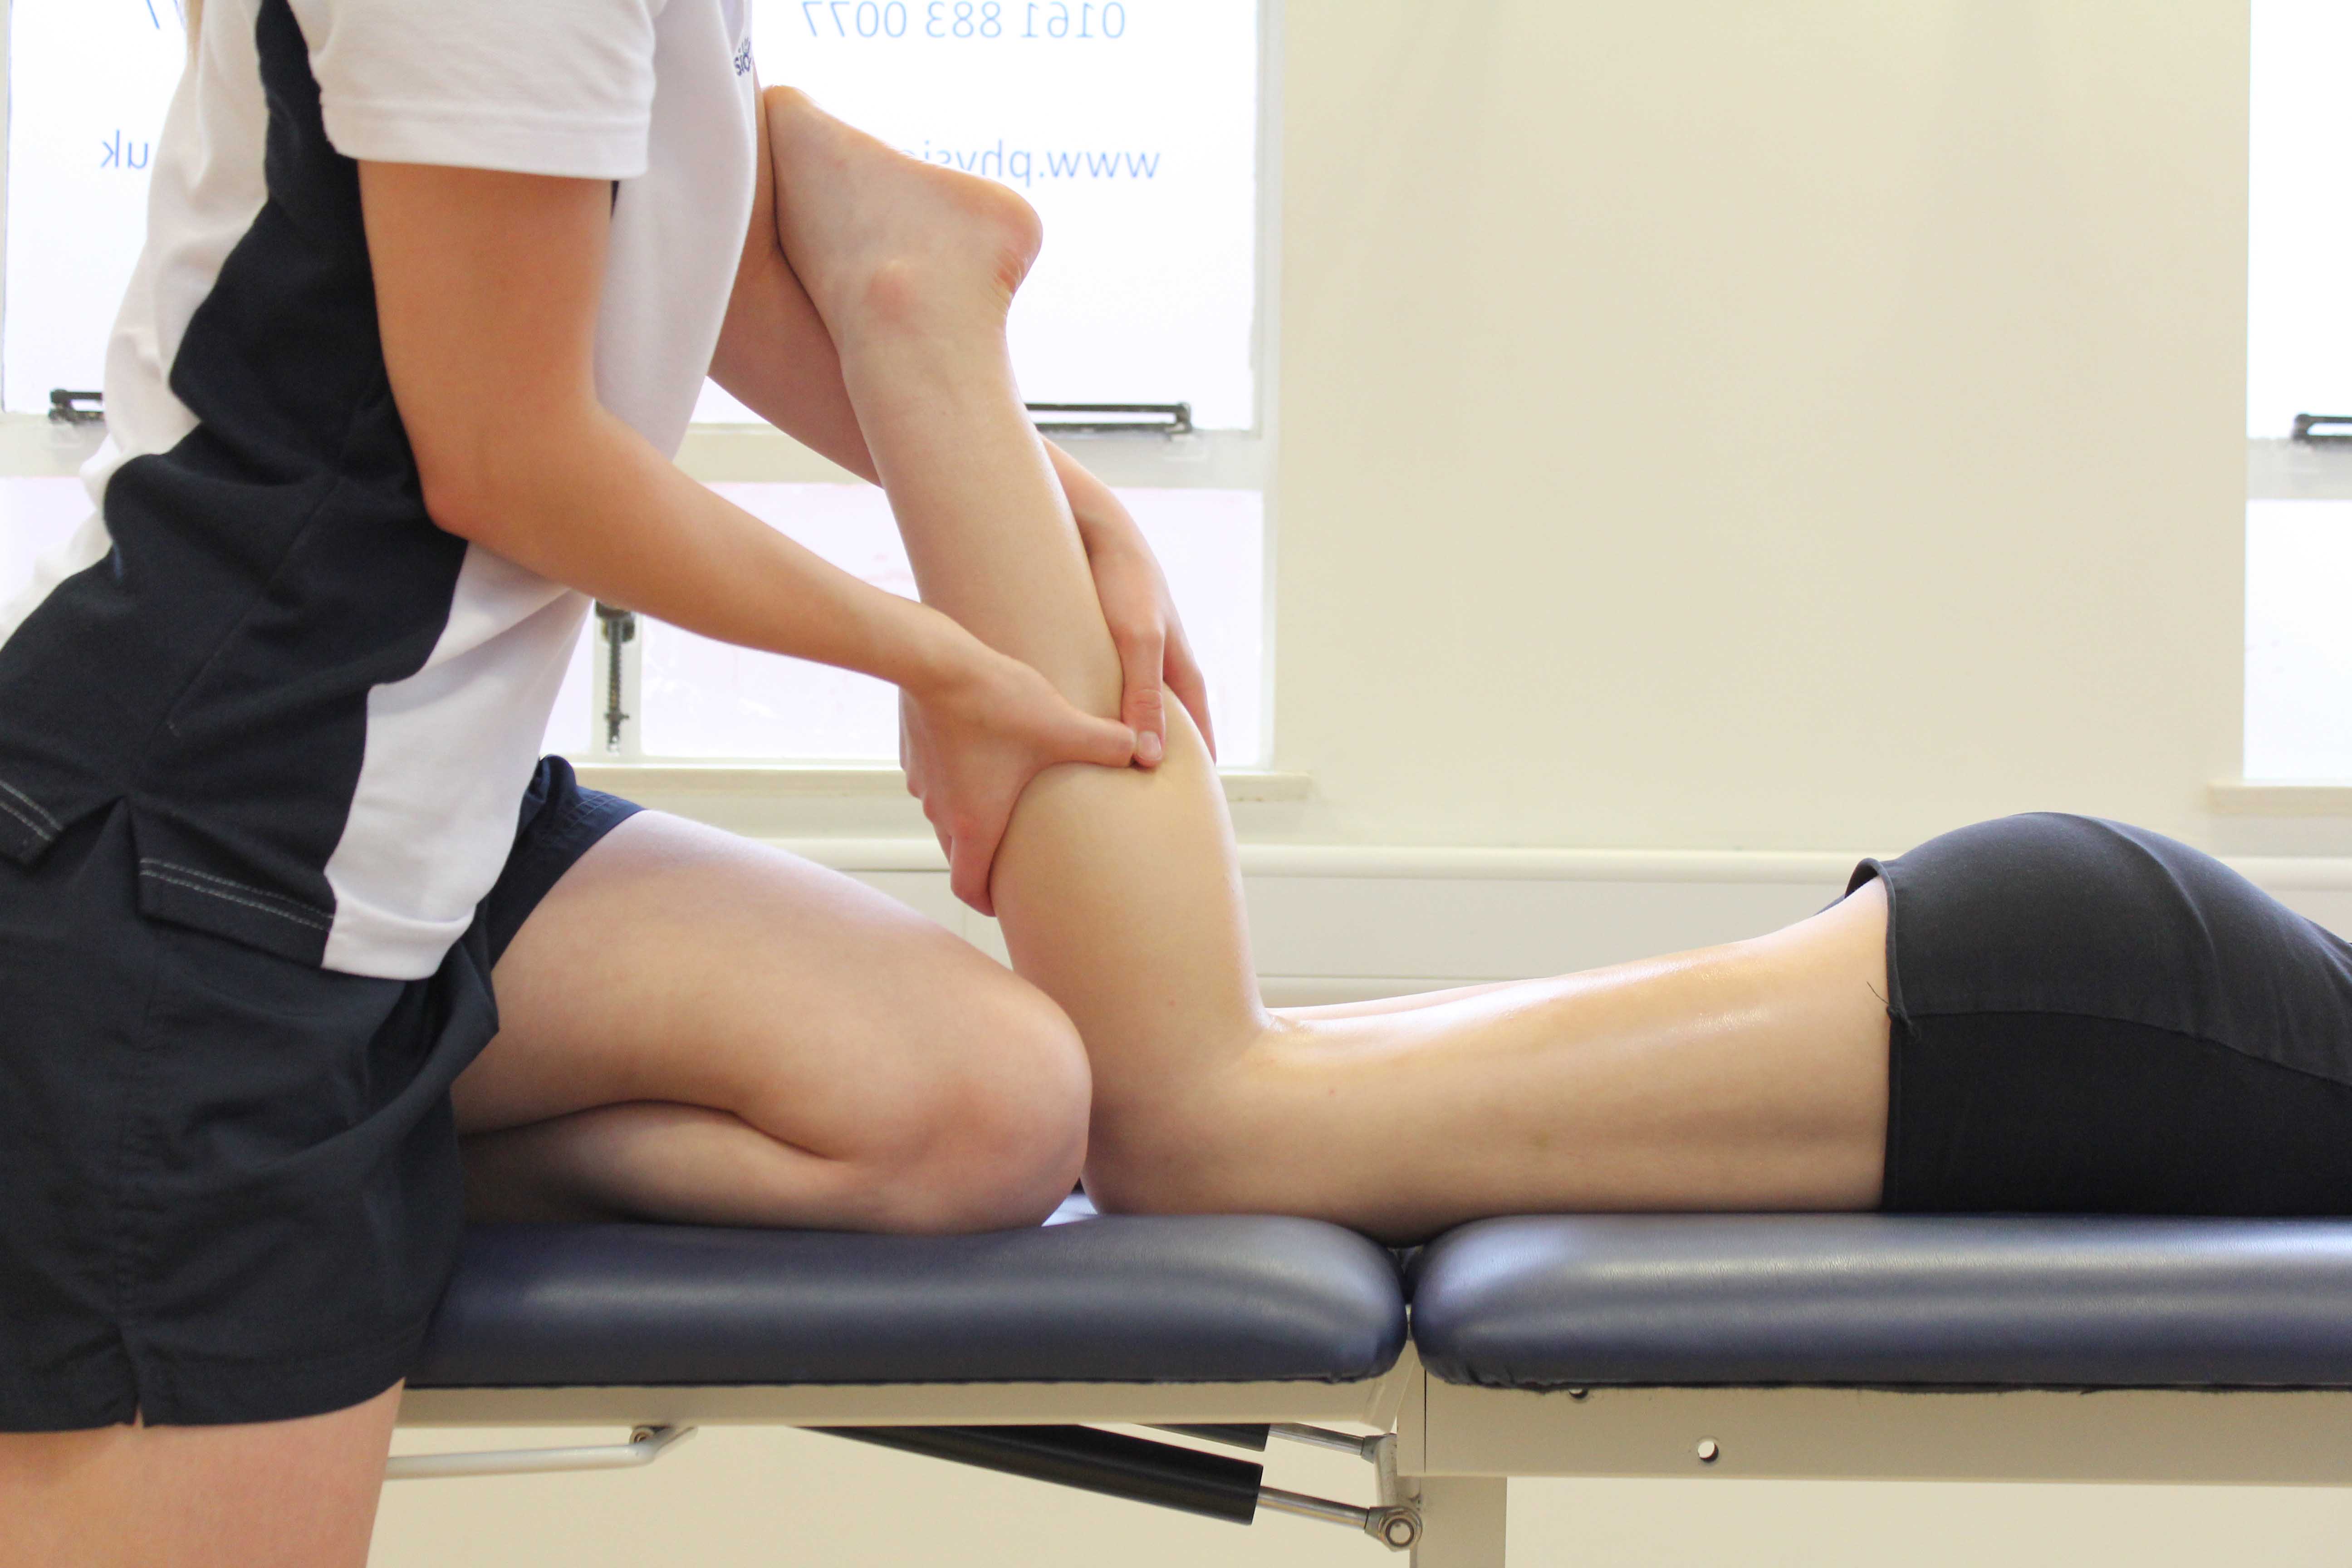 Calf Strain - Lower Leg - Conditions - Musculoskeletal - What We Treat 